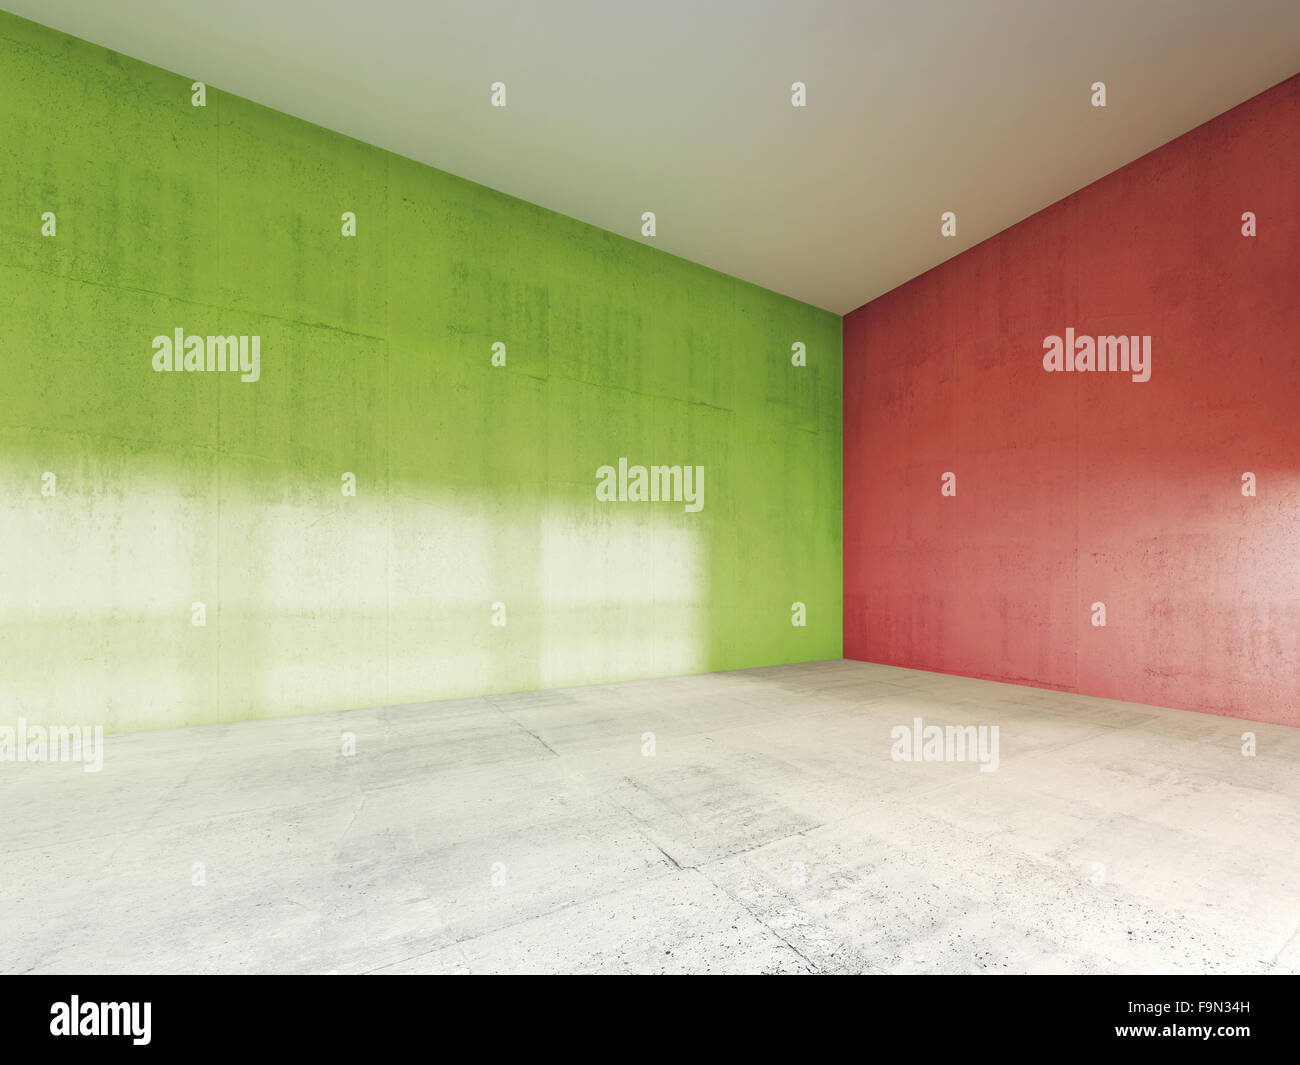 Abstract modern interior, empty room with red and green concrete walls. 3d render illustration Stock Photo